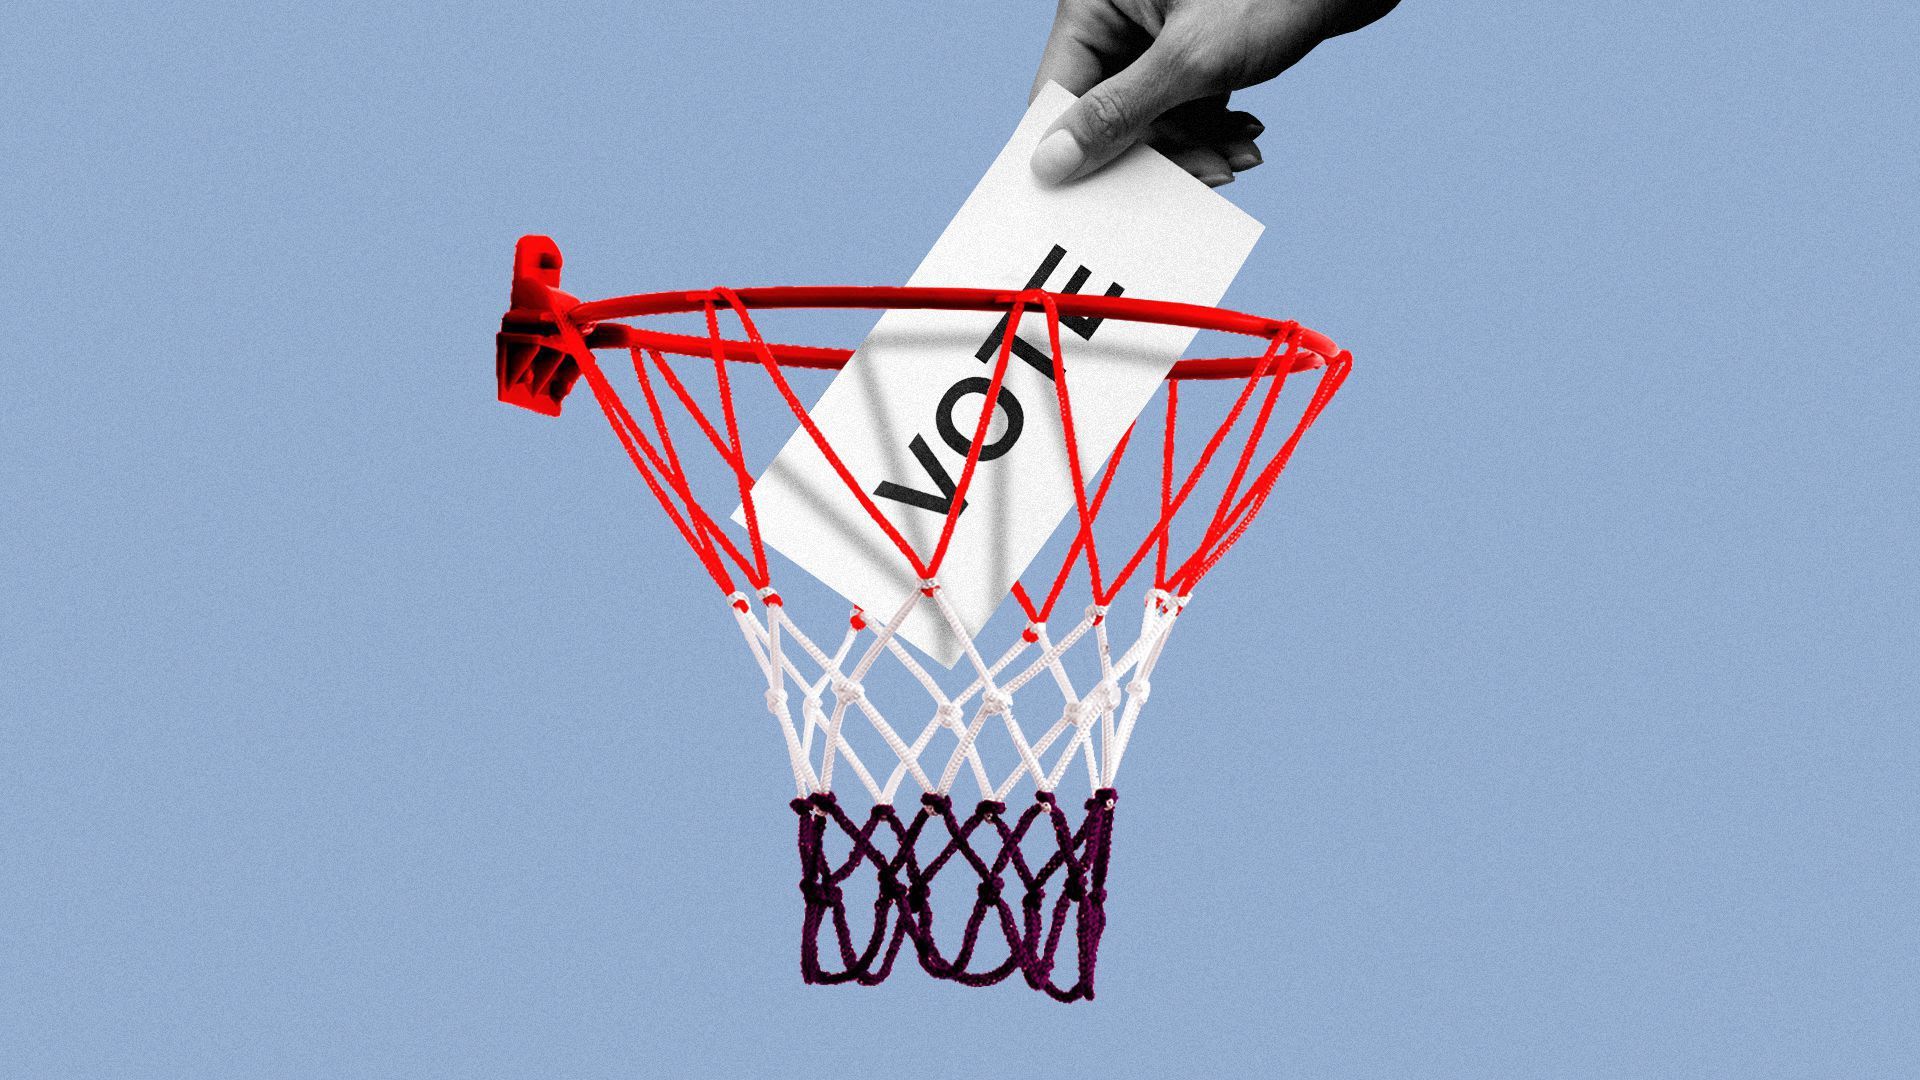 A person putting a ballot in a basketball hoop.